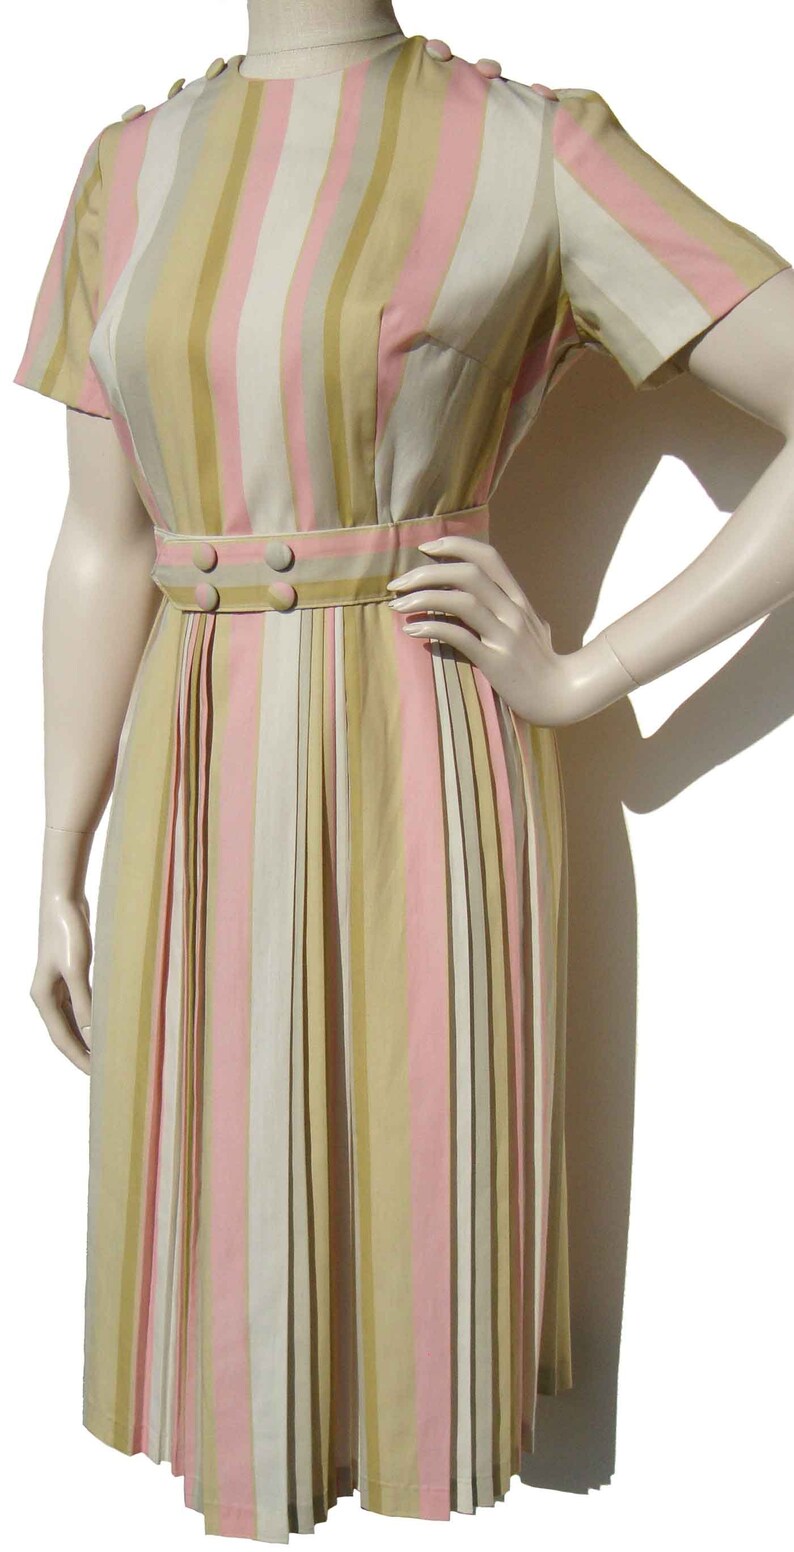 Vintage 60s Pleated Dress Pink Striped Shirtwaist Novelty Buttons M image 2